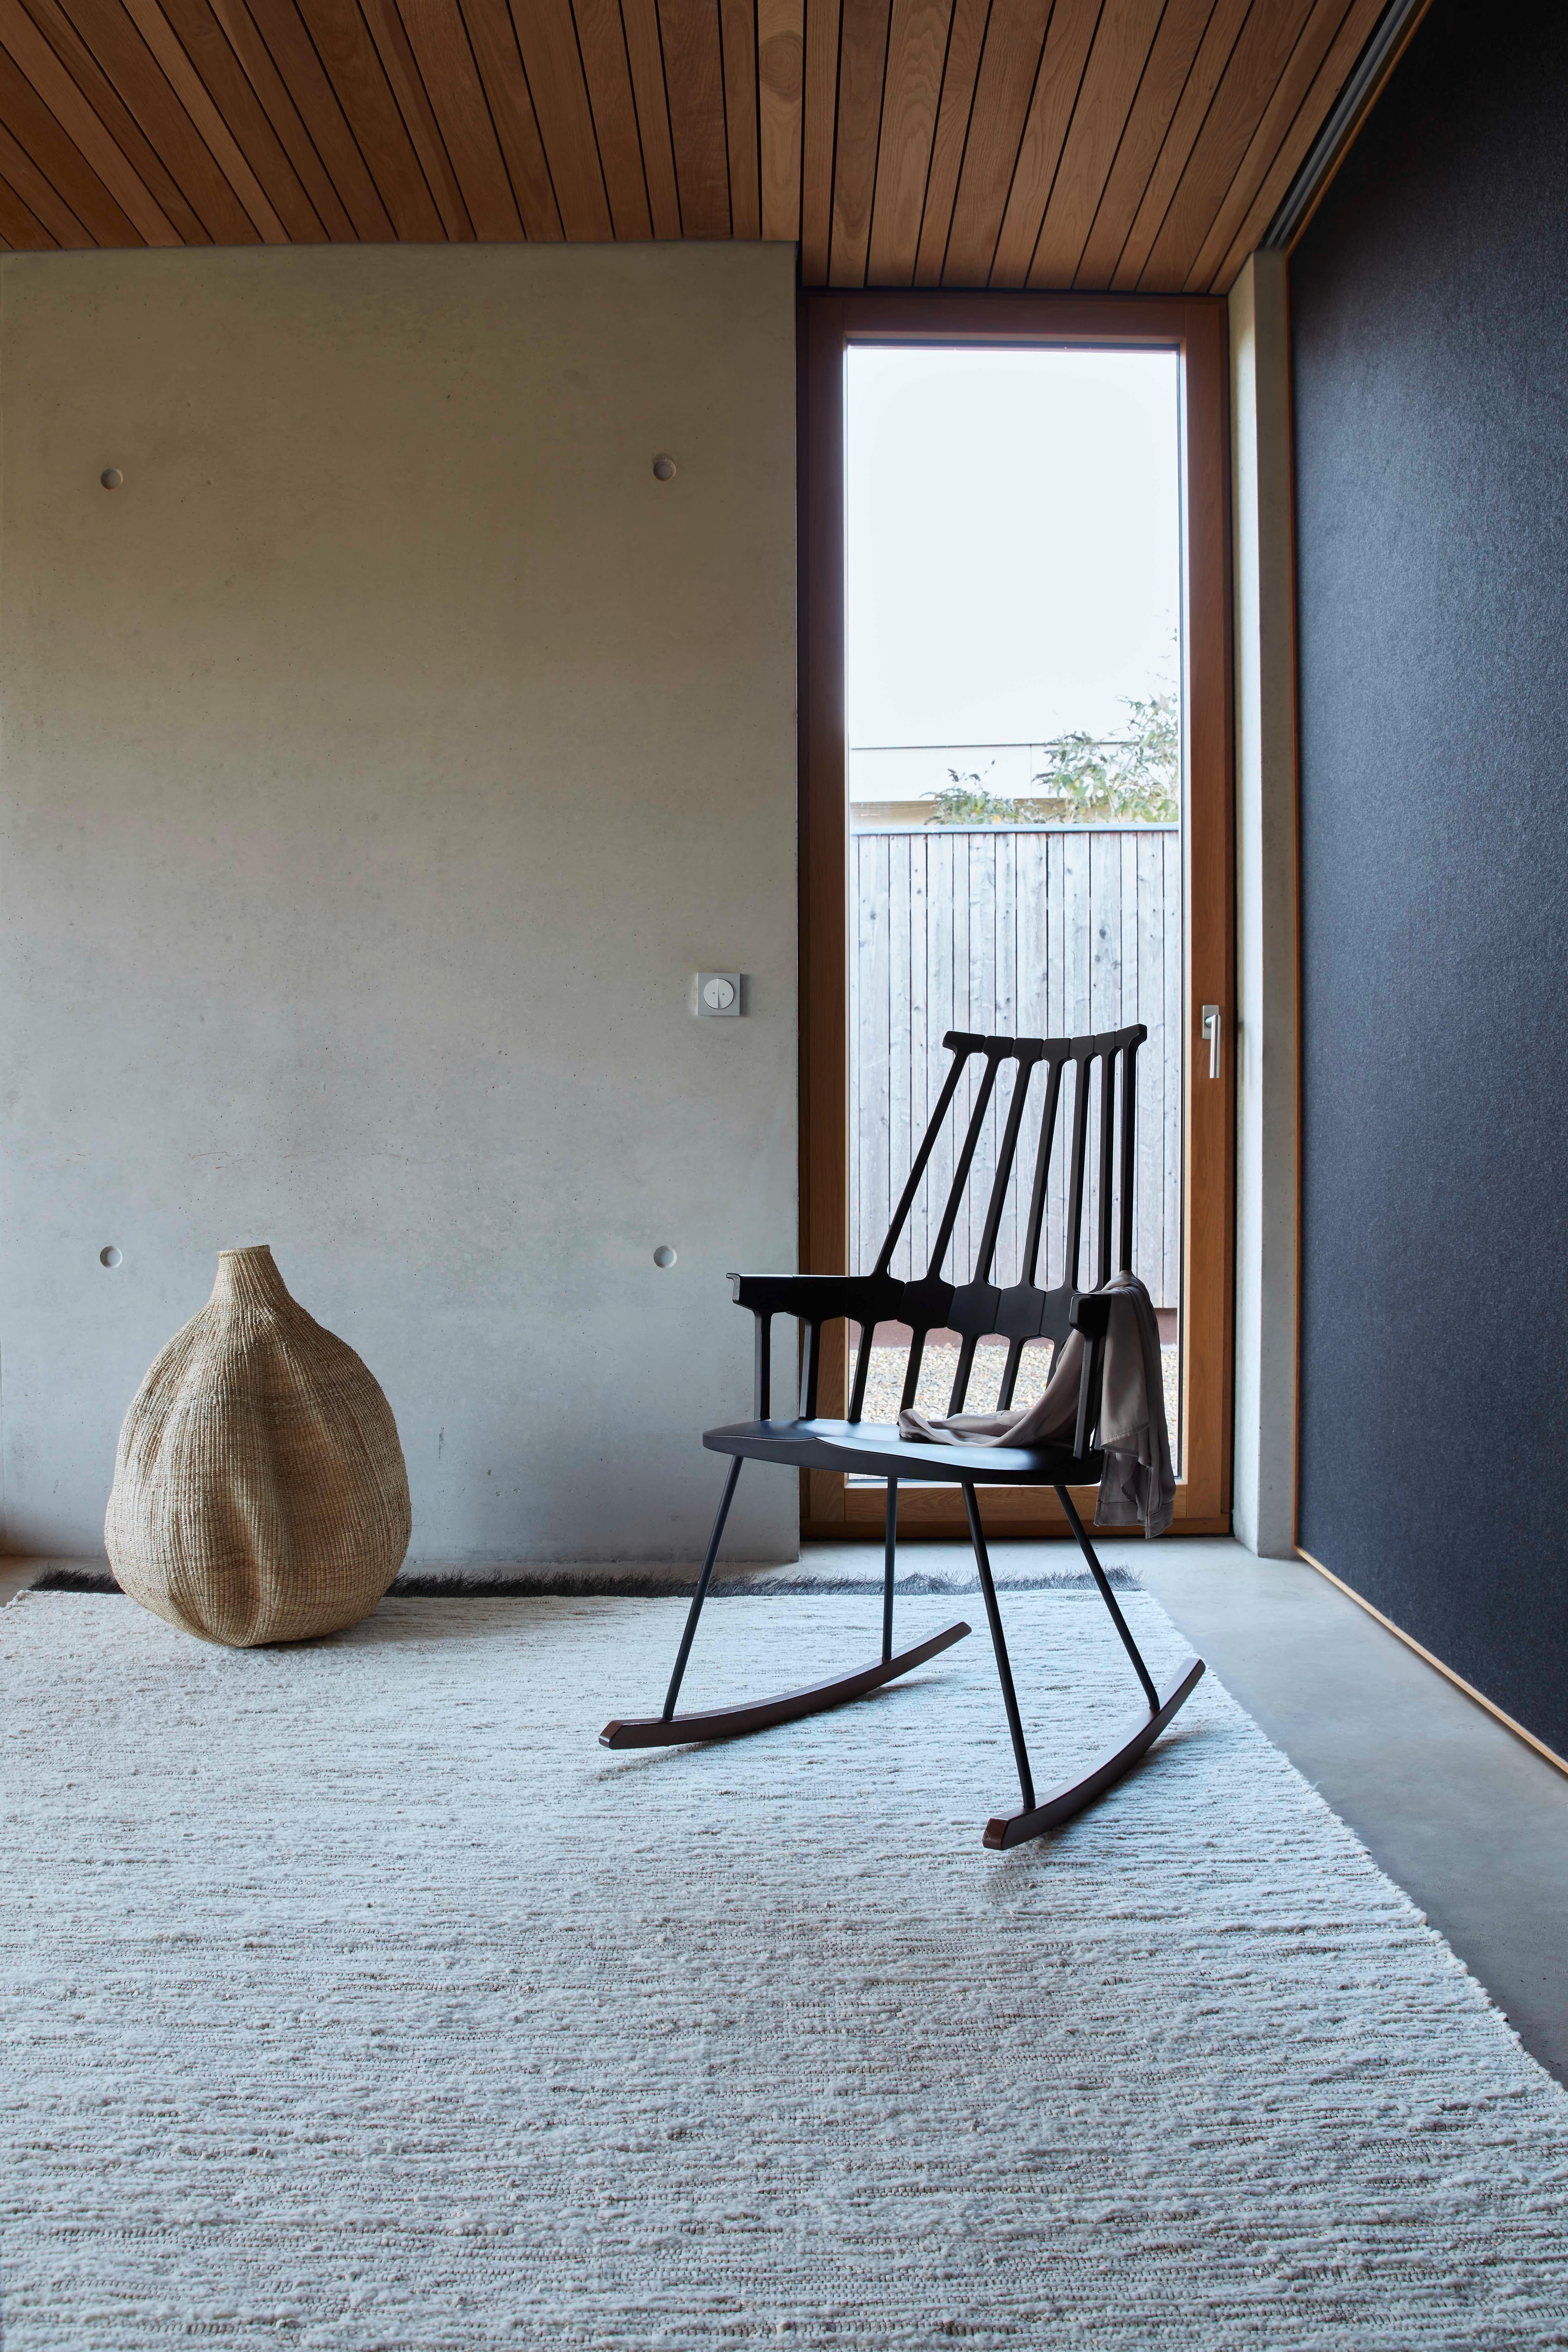 Coco Rug // indoor // German Design Award winner
Here at NOMAD, we believe in innovation, in pushing boundaries and redefining the image of re- and upcycling in the interior industry. Our goal is to create design products with a special feel, a